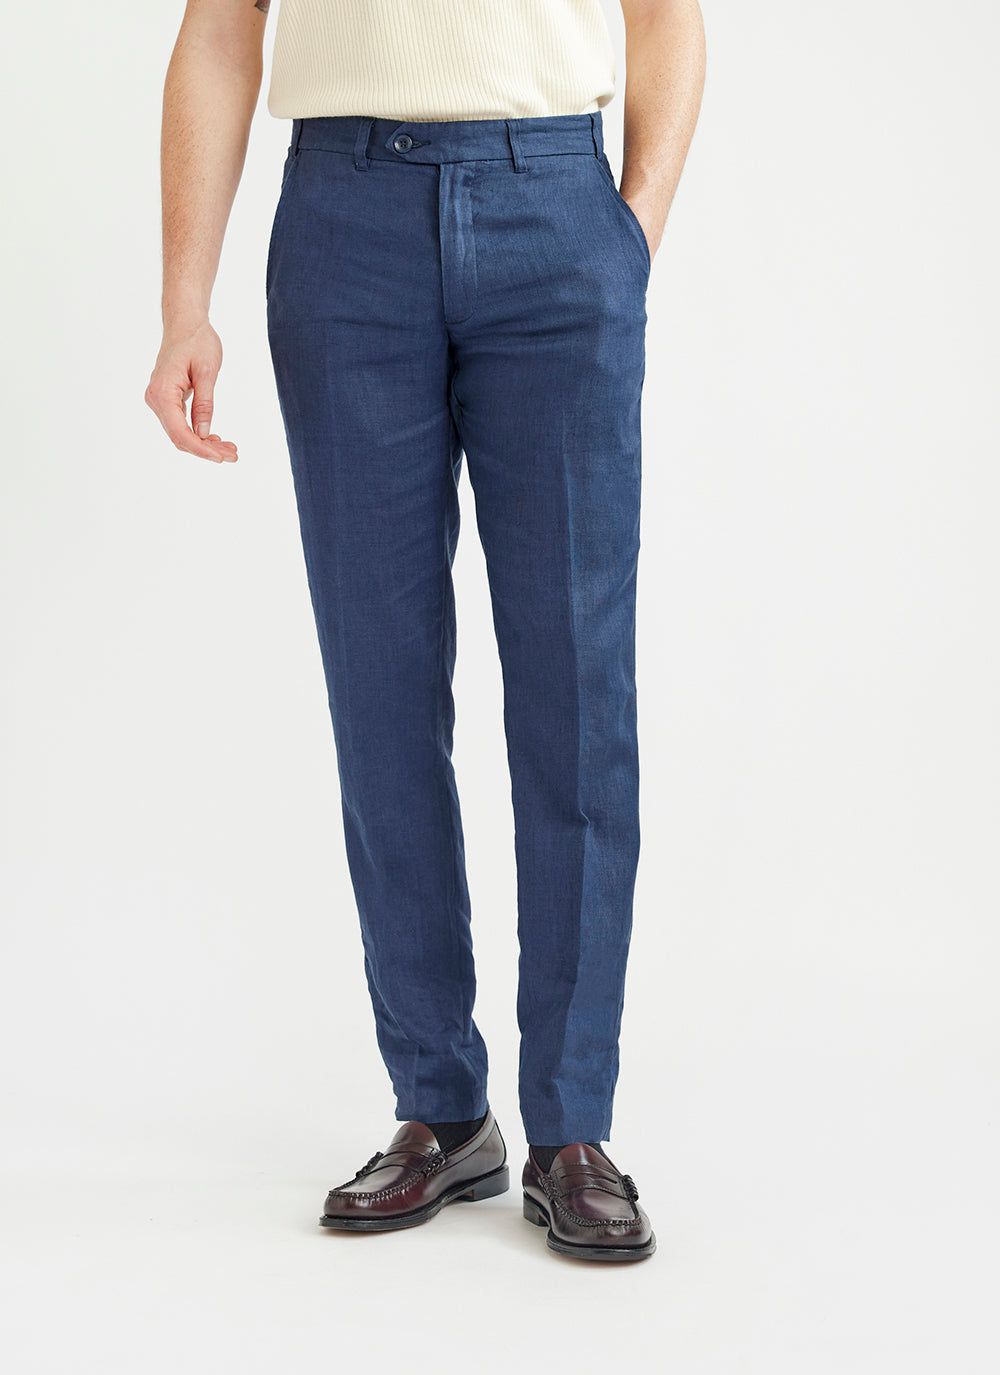 tailored trousers men black in polyester - ACNE STUDIOS - d — 2